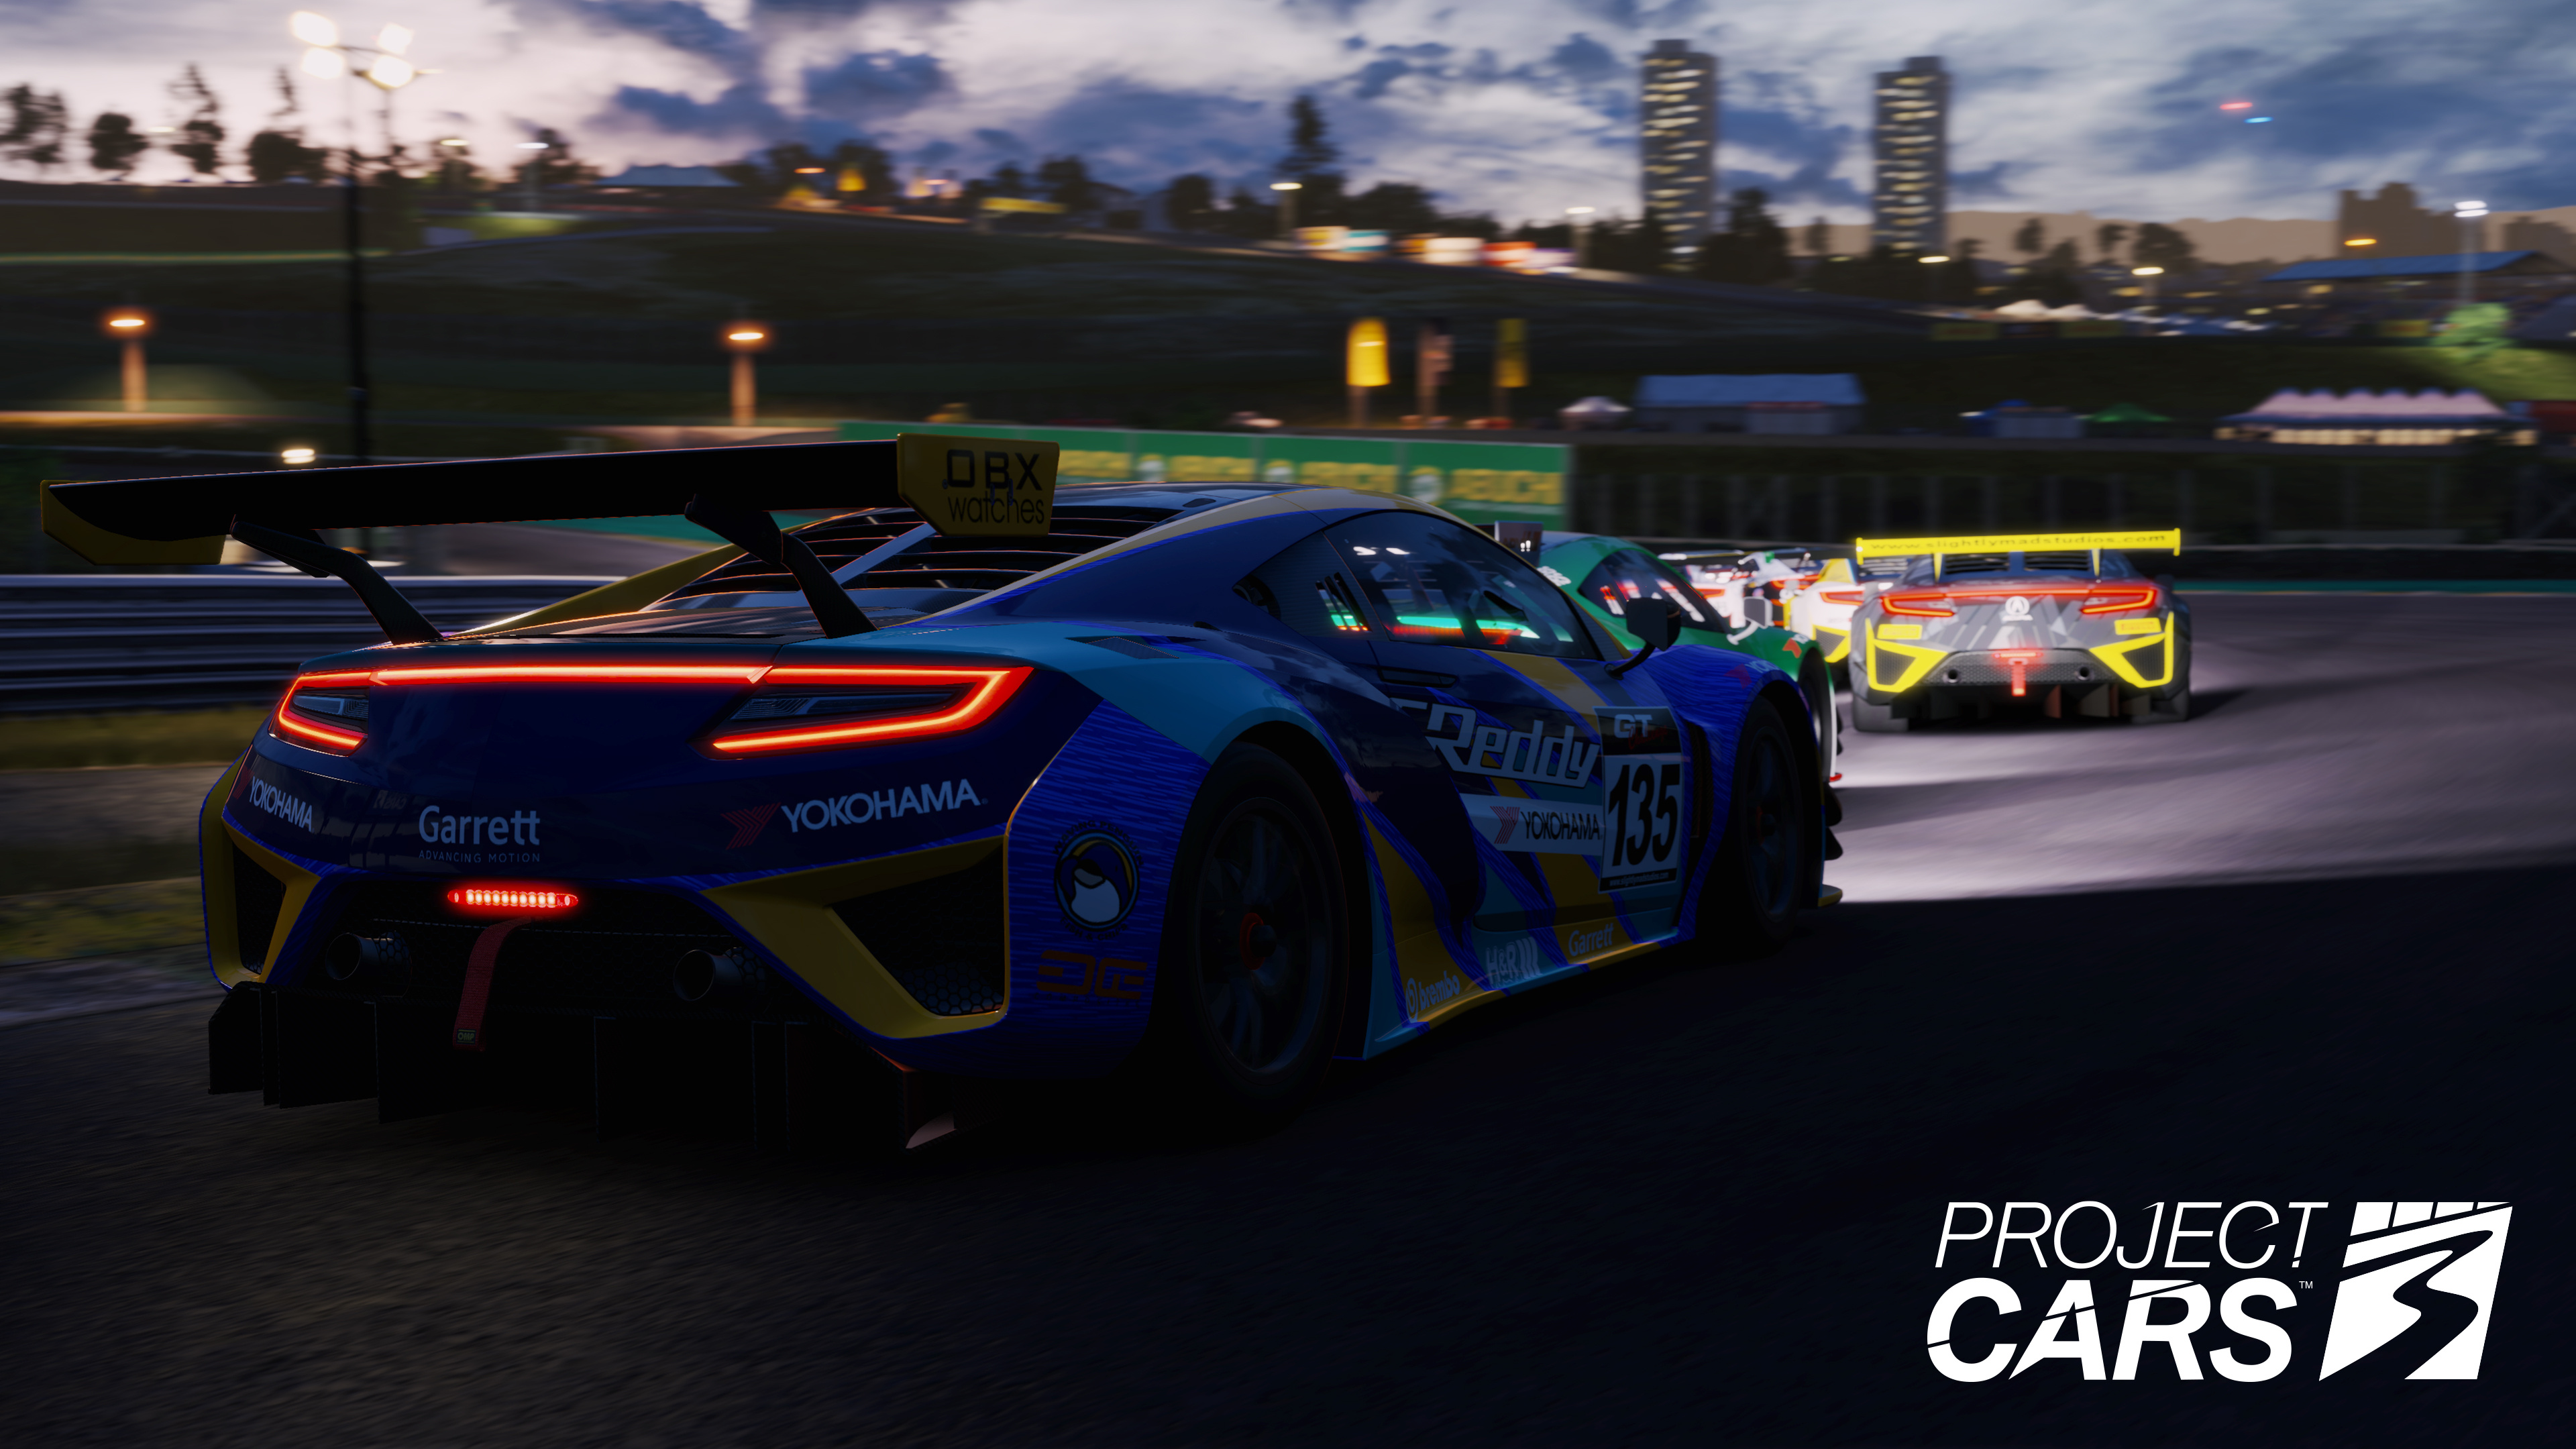 project-cars-3-shifts-into-gear-on-ps4-this-august-new-screenshots-released-push-square